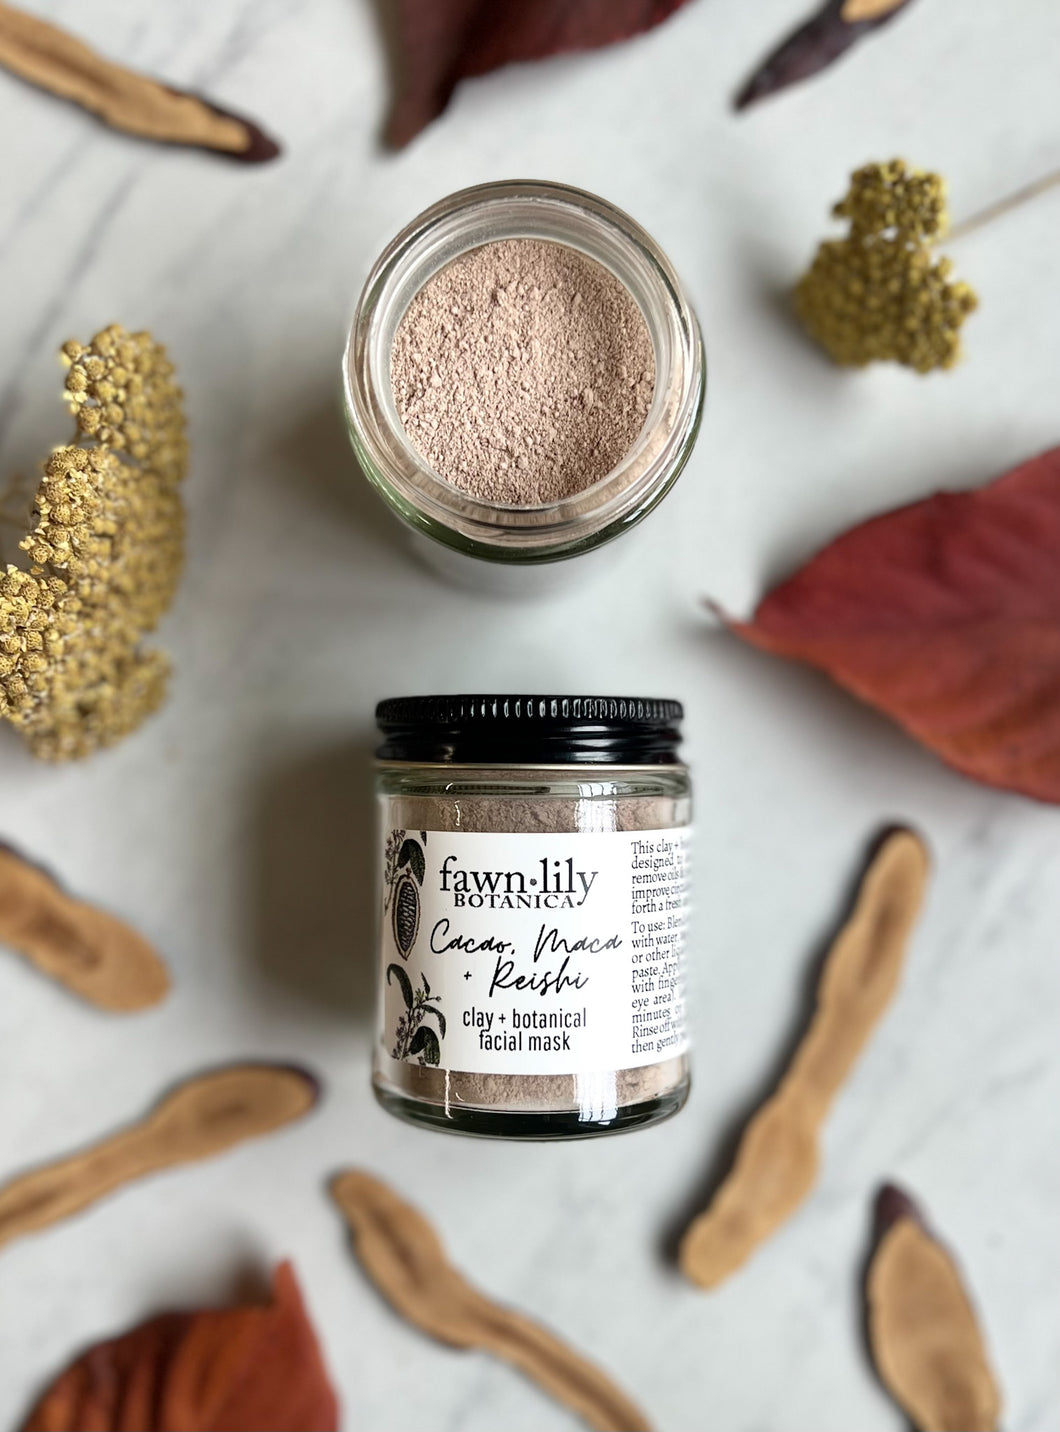 cacao maca plant-based botanical skin clay mask to cleanse and nourish skin